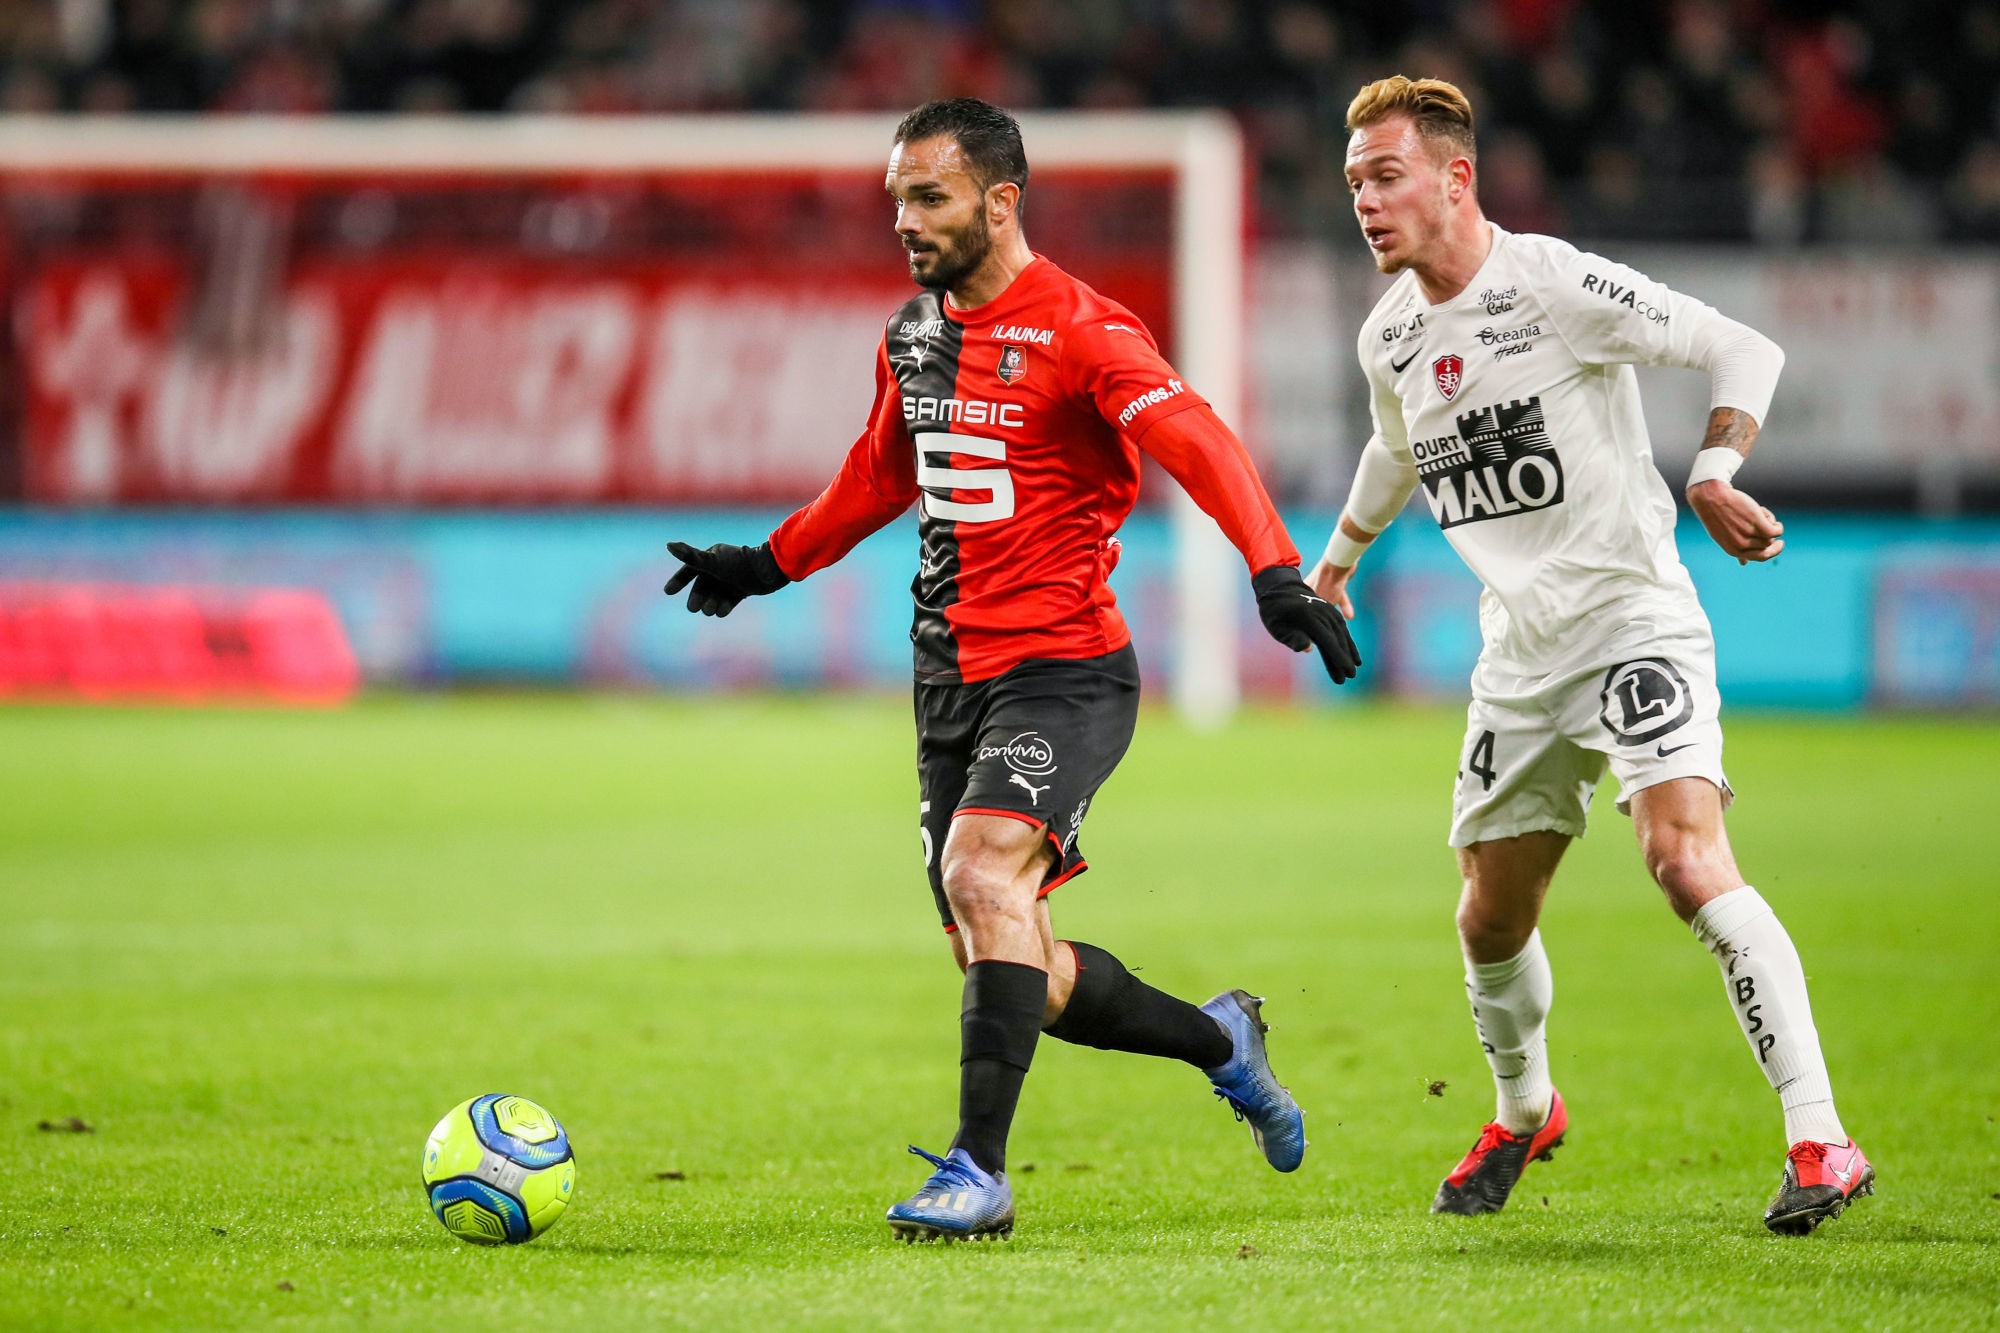 Jeremy MOREL of Rennes and Irvin CARDONA of Brest during the Ligue 1 match between Stade Rennes and Stade Brest at Roazhon Park on February 8, 2020 in Rennes, France. (Photo by Vincent Michel/Icon Sport) - Jeremy MOREL - Irvin CARDONA - Roazhon Park - Rennes (France)